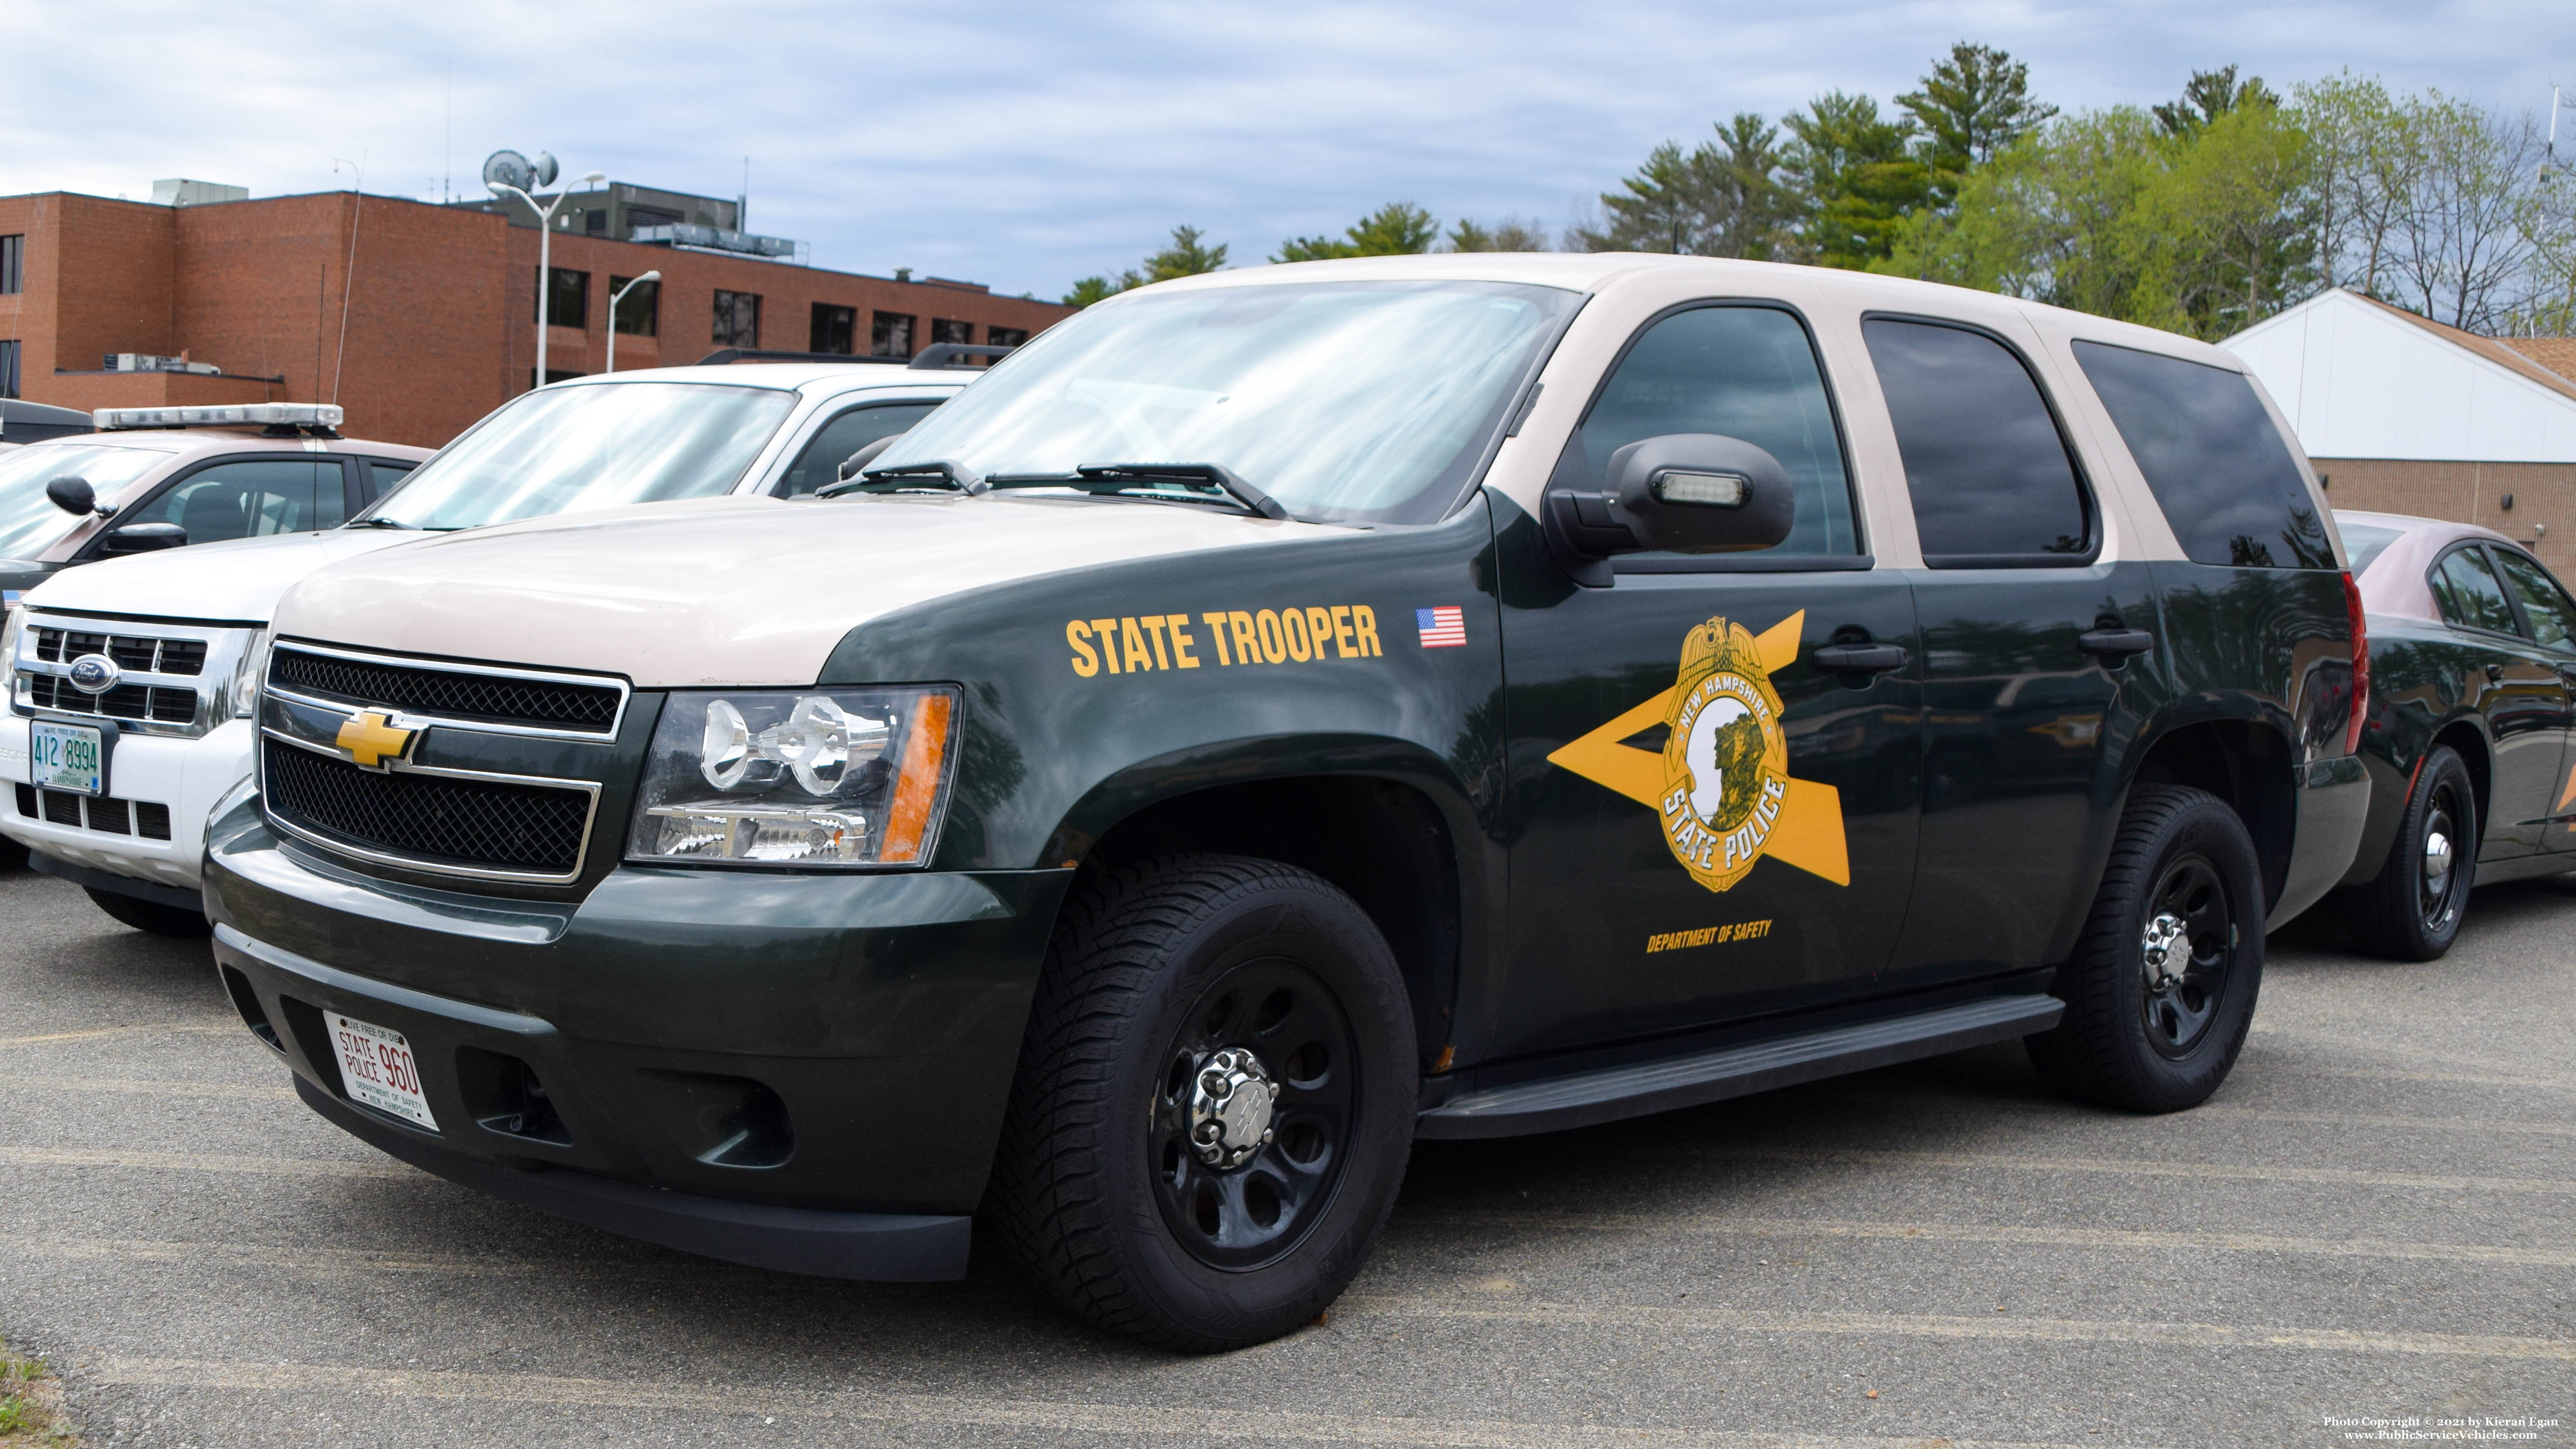 A photo  of New Hampshire State Police
            Cruiser 960, a 2007-2013 Chevrolet Tahoe             taken by Kieran Egan